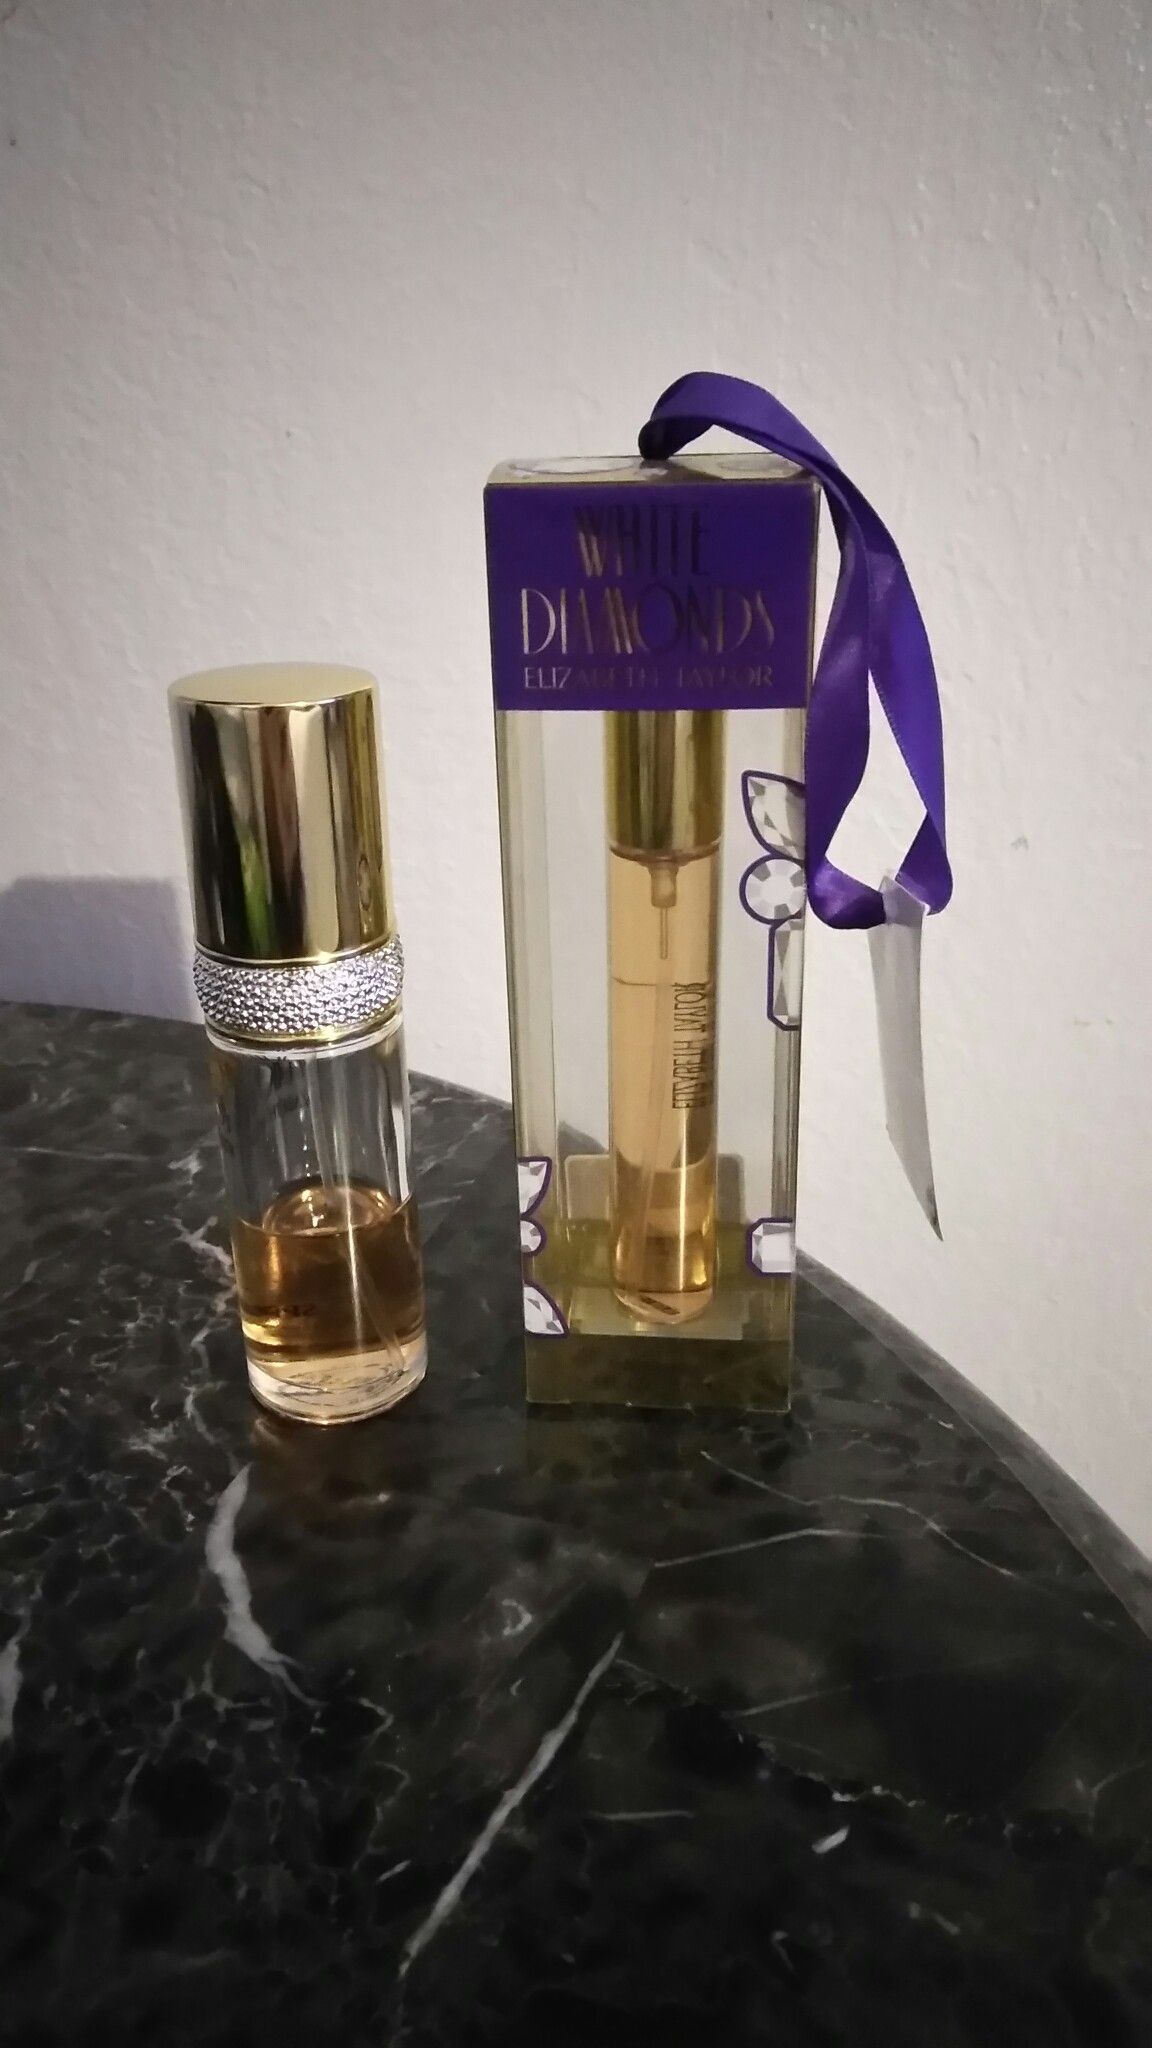 Brand new perfume throwing the other one free